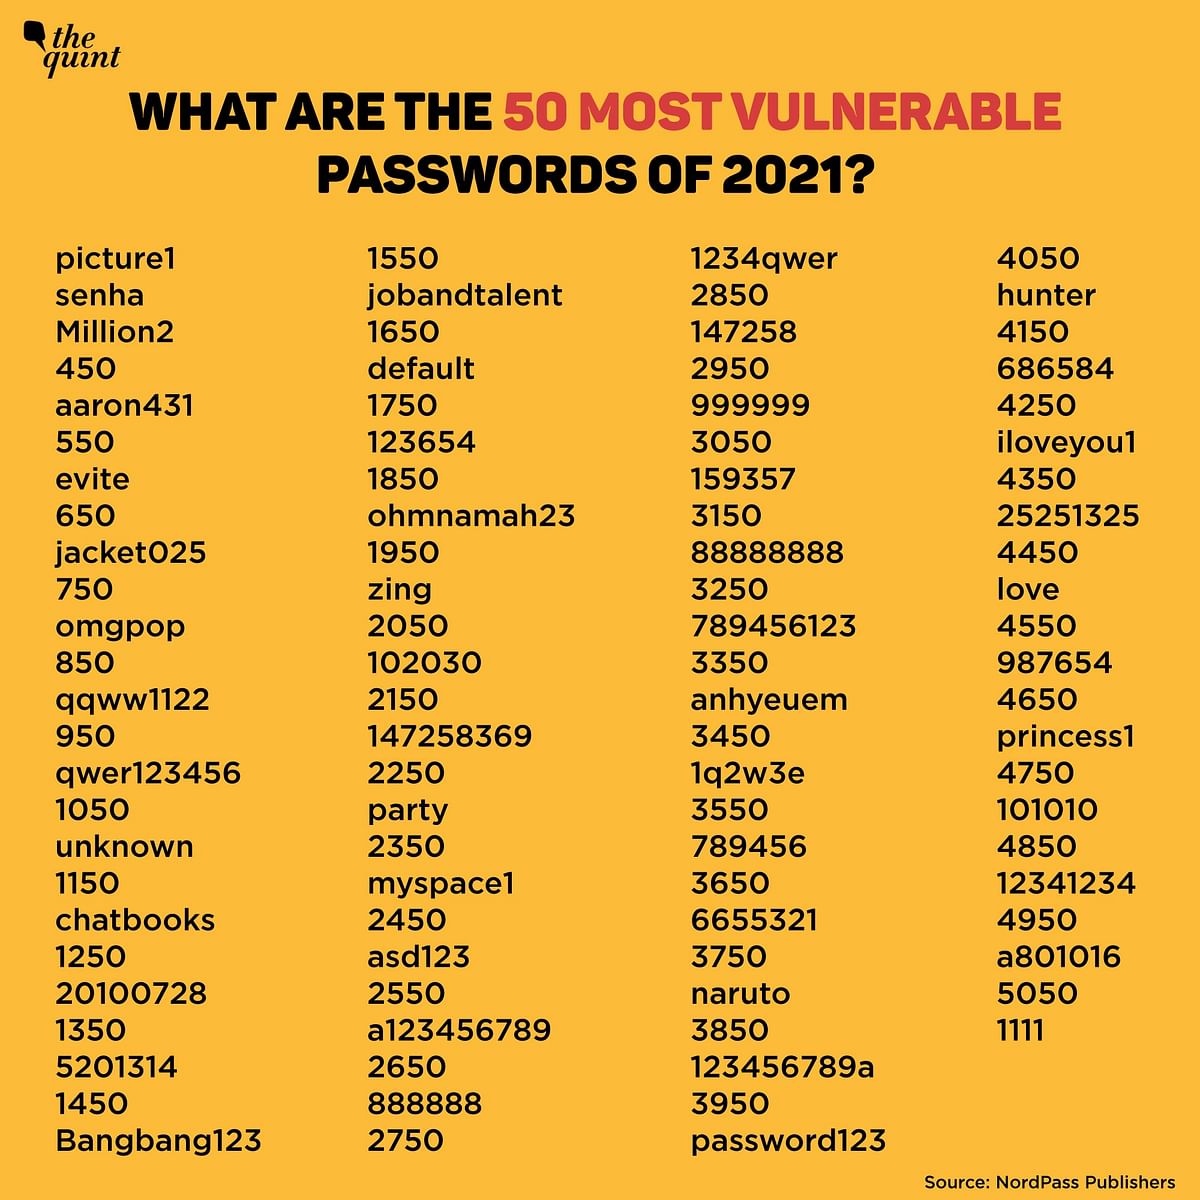 If you do not have a strong password, you are susceptible to identity thefts and financial frauds.